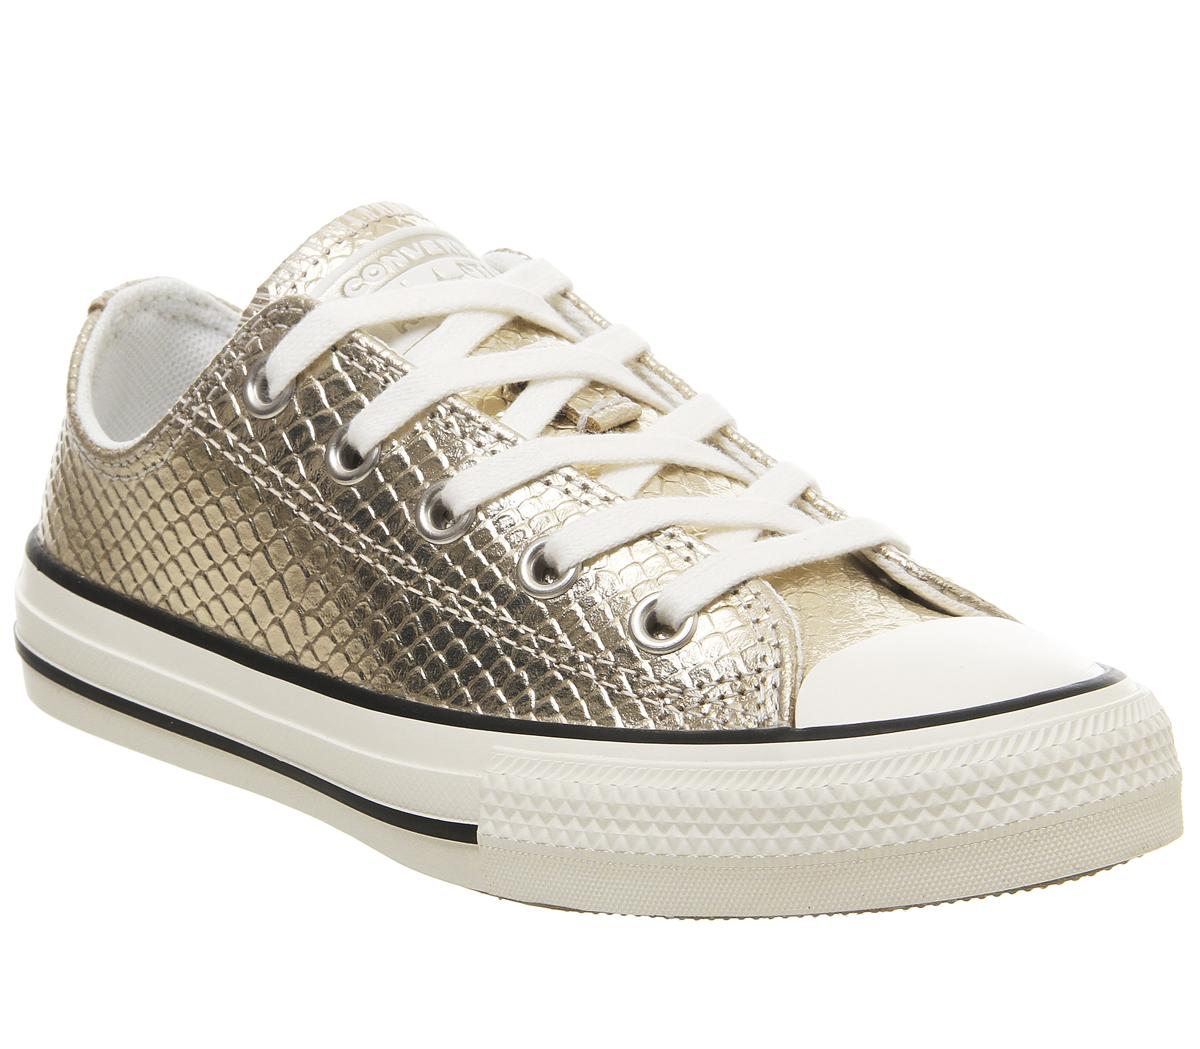 Converse All Star Low Youth Trainers Gold Metallic Snake - Unisex